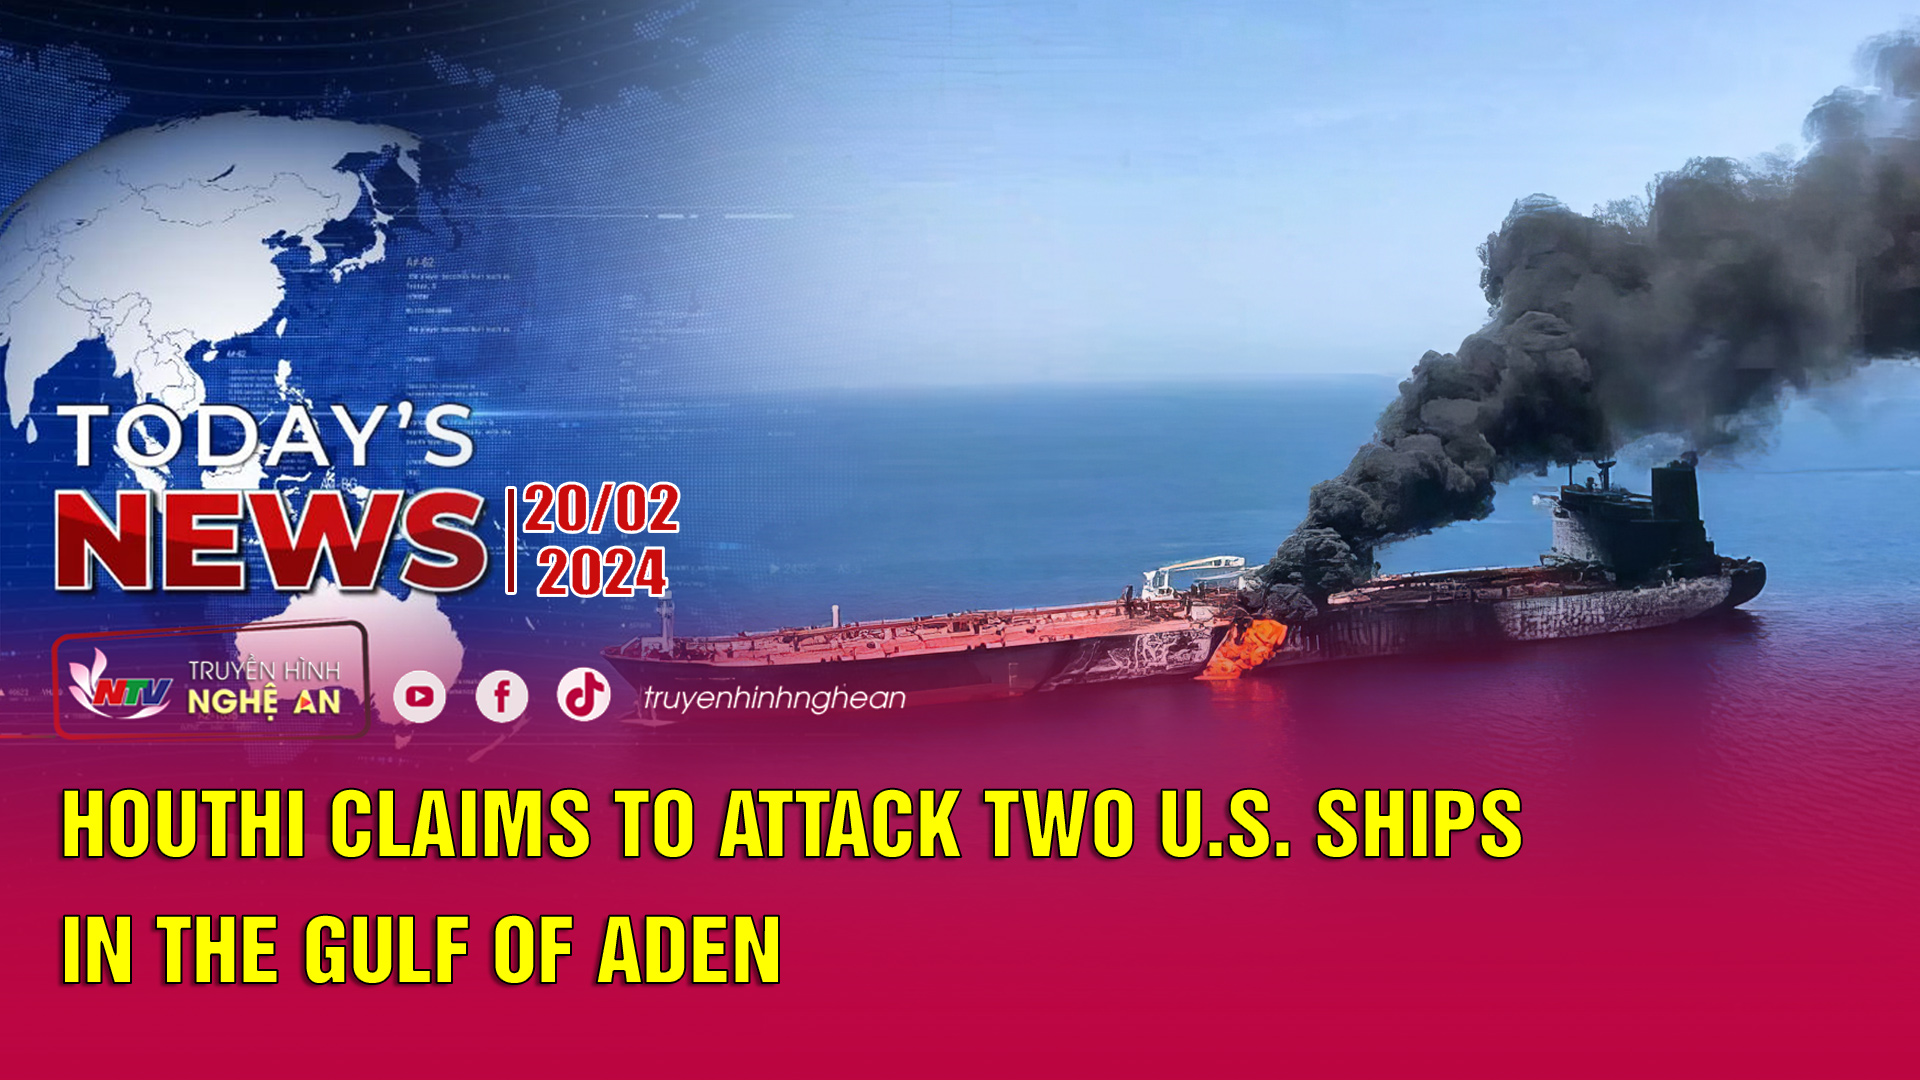 Today's News 20/2/2024: Houthi claims to attack two U.S. ships in the Gulf of Aden